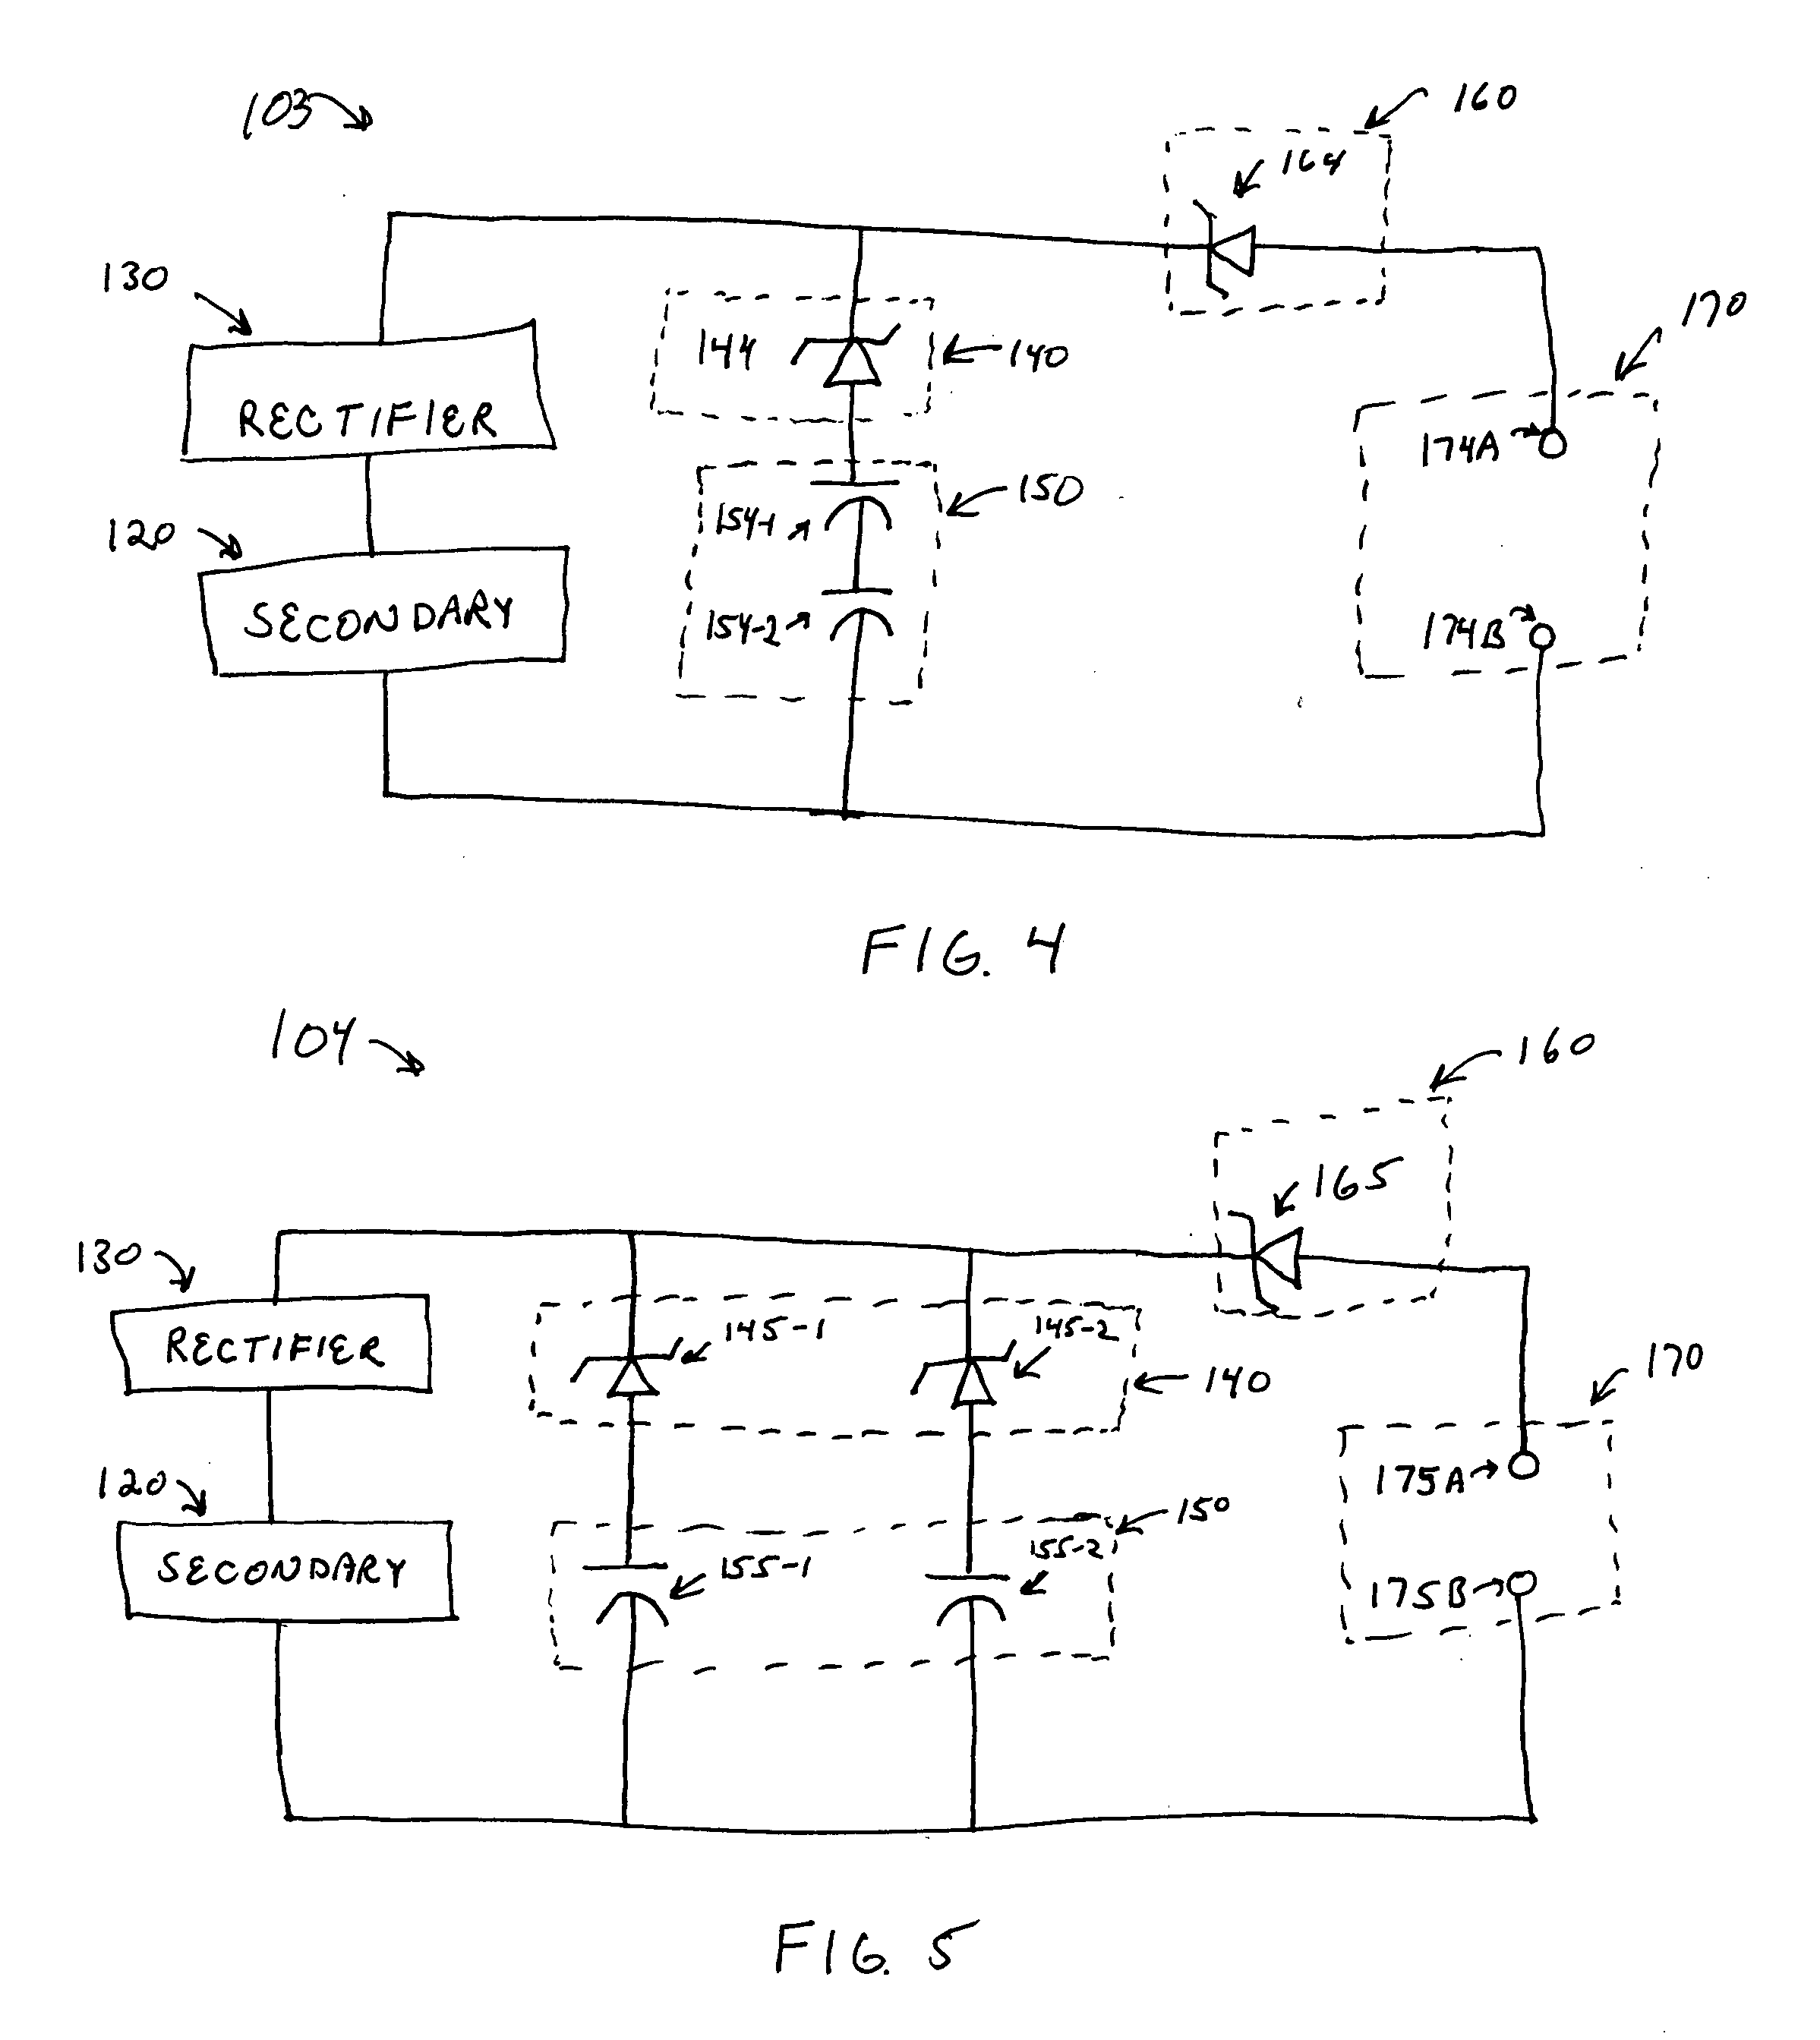 Electrostatic charge storage assembly